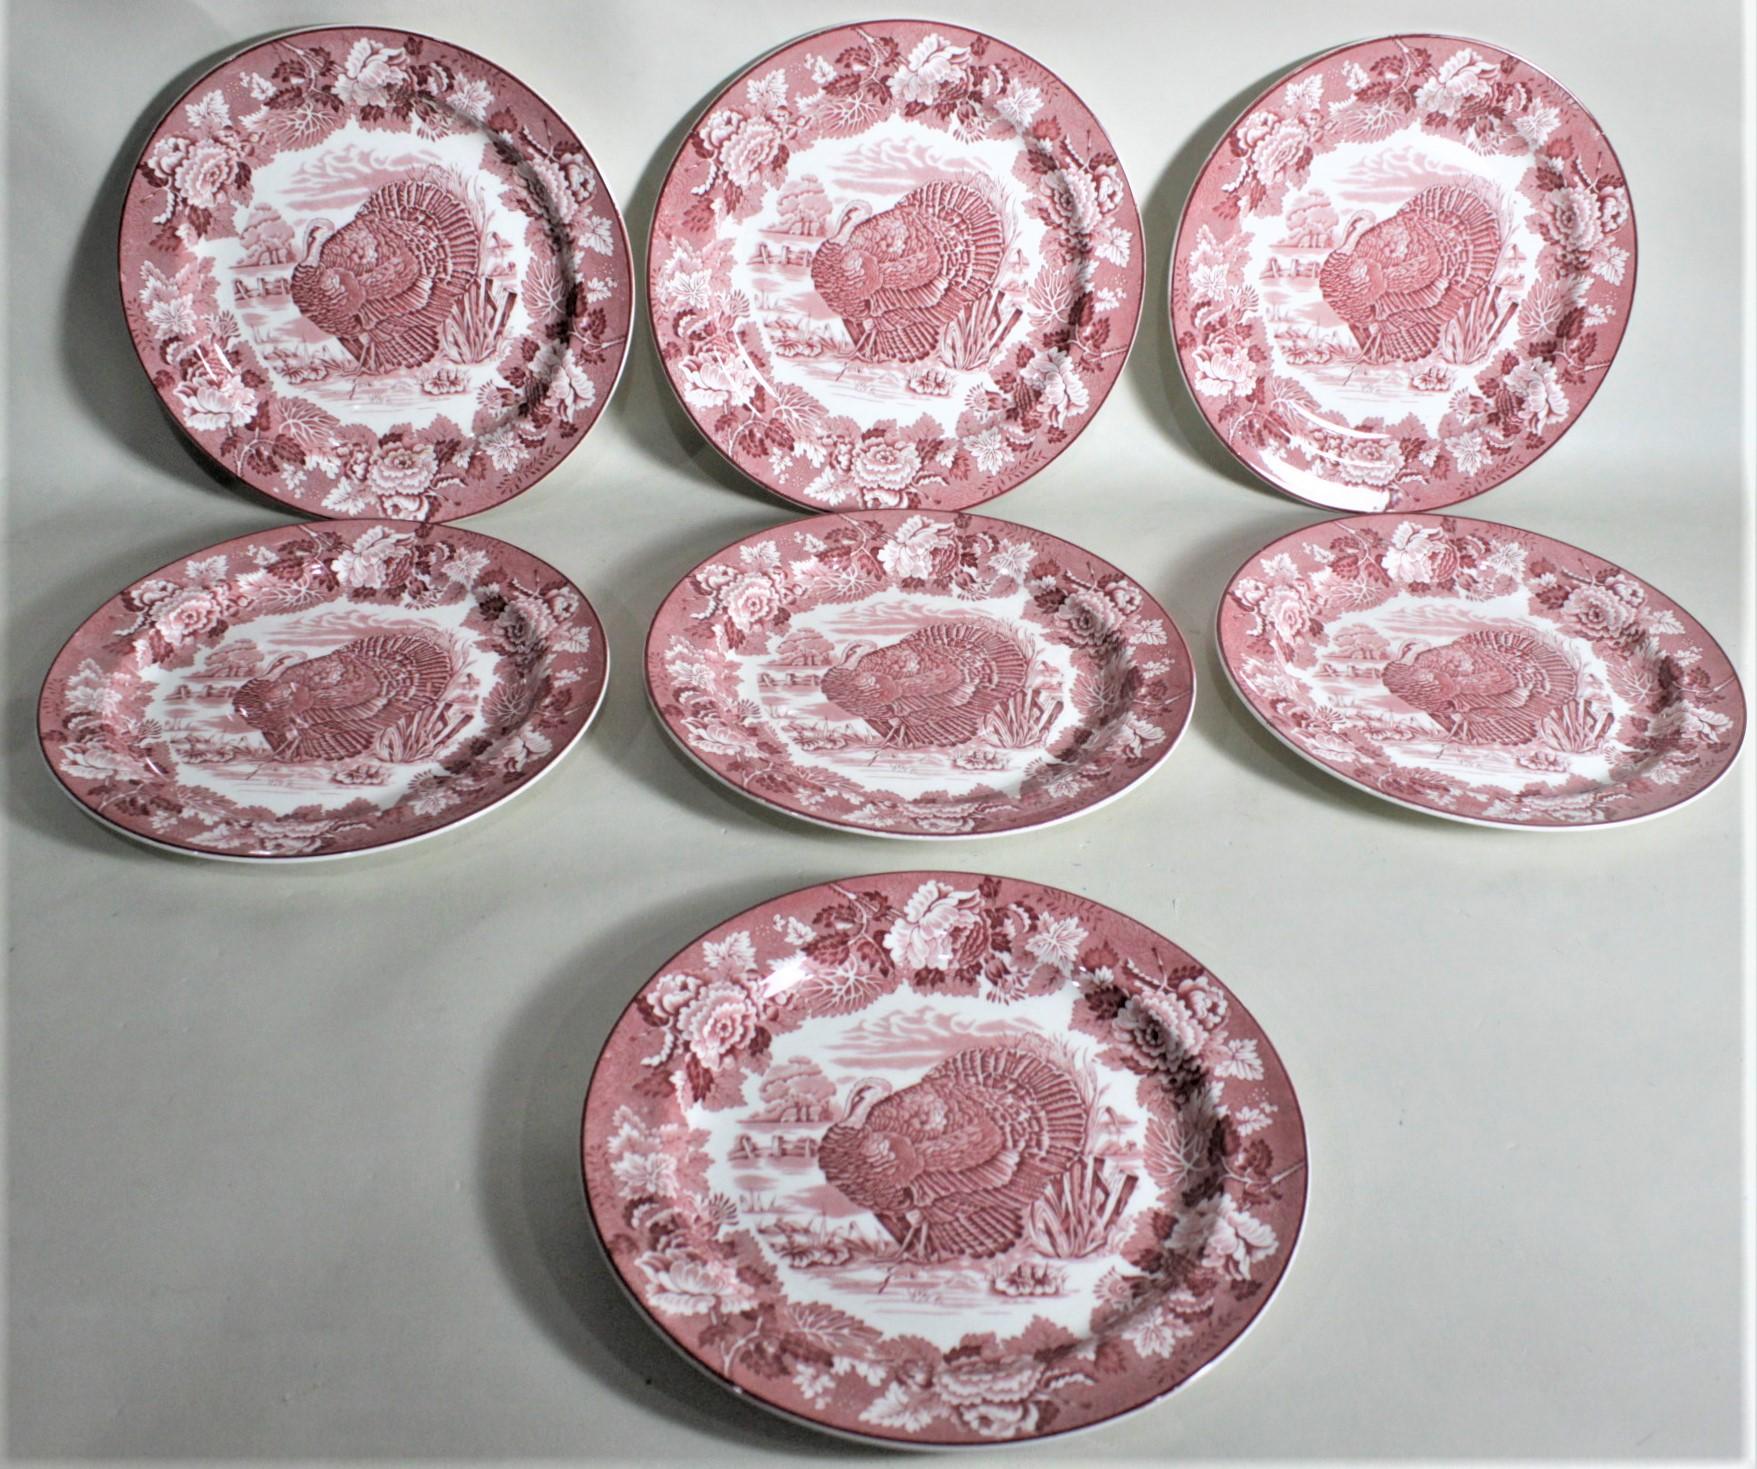 This set of seven antique ten inch dinner plates were made by Woods Burslem of England in circa 1880 in the Victorian style. Each plate is done in a red transferware on a cream stoneware ground and depicts a large male wild turkey in the foreground